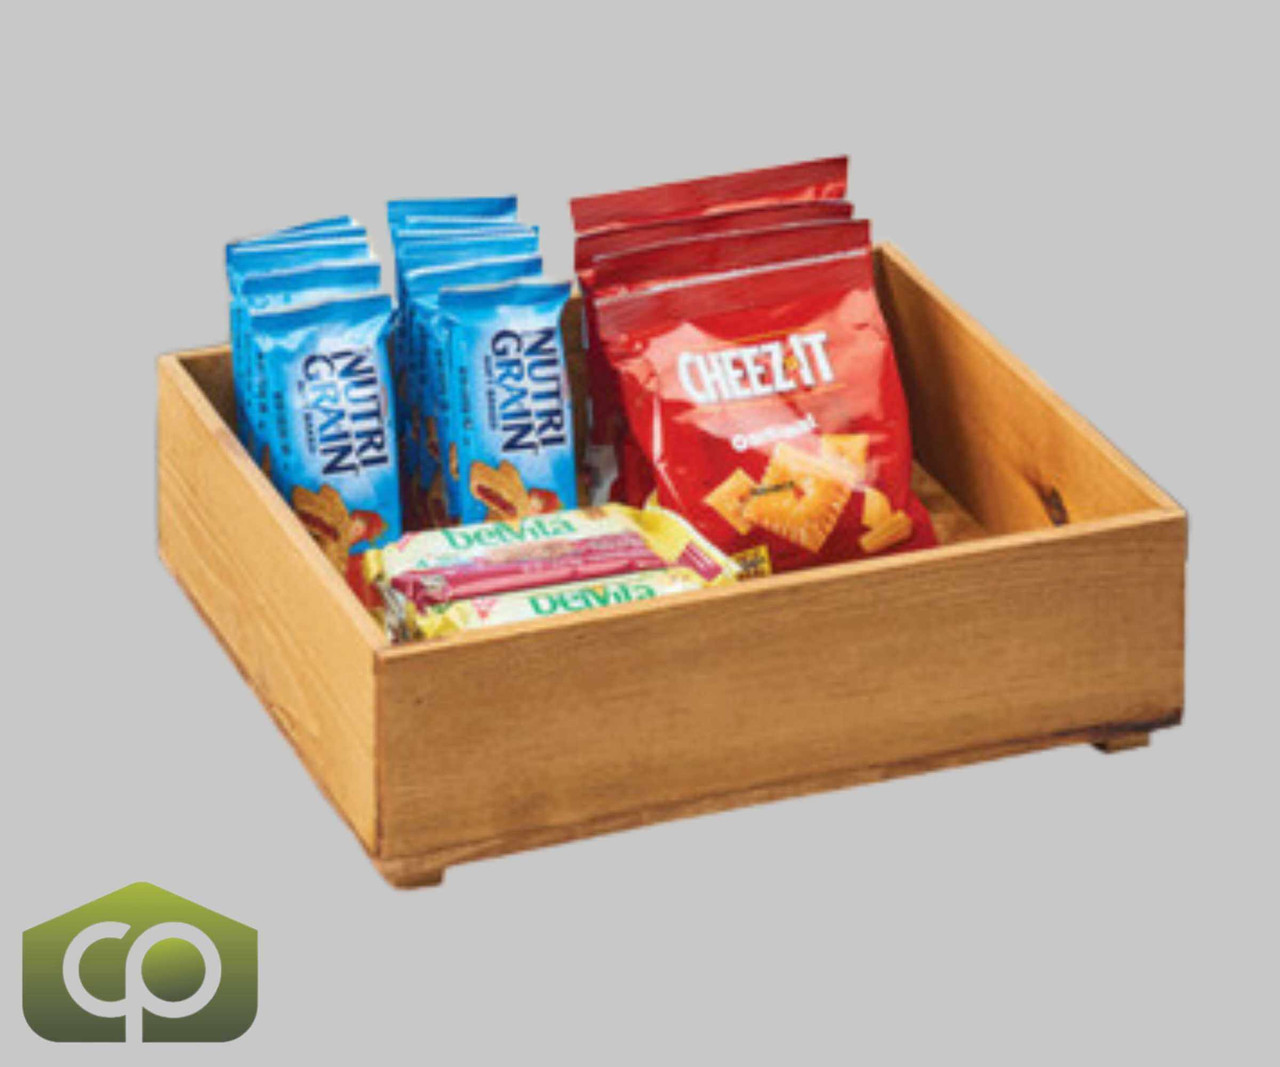 Cal-Mil Madera 12" x 10" x 3 1/2" Wood Stacking Box | Rustic Display for Snacks, Condiments, and More